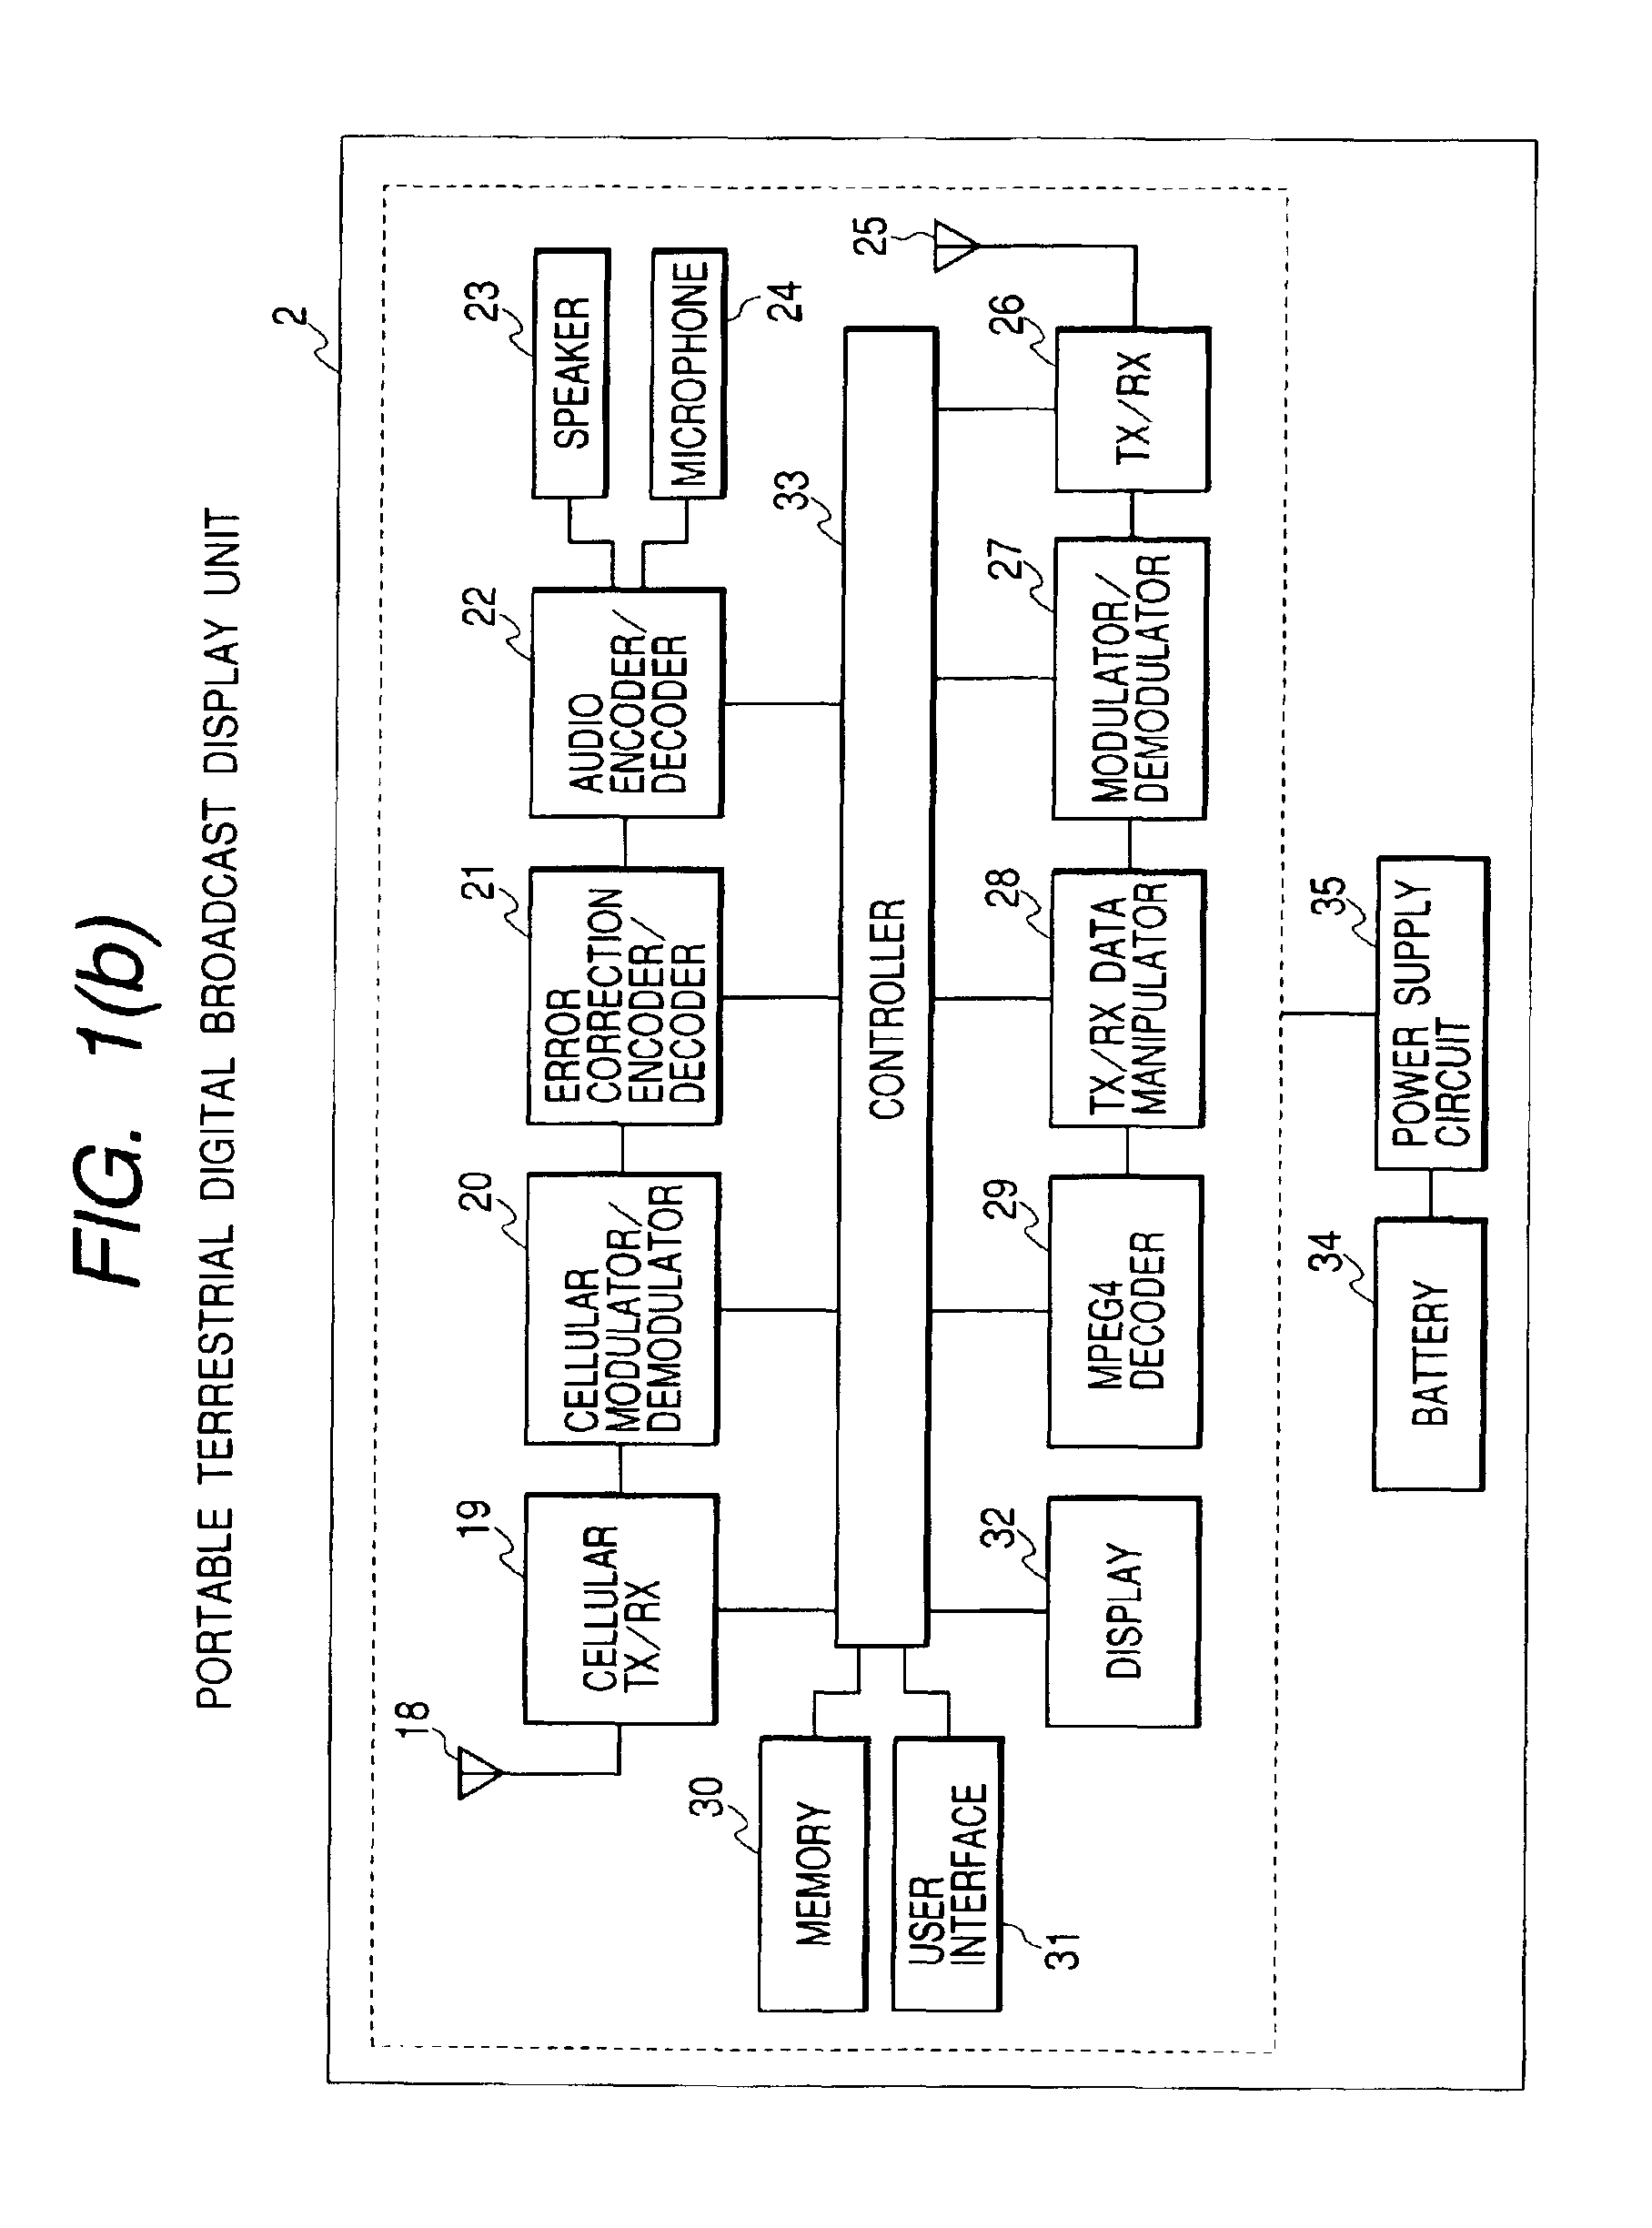 Digital broadcast channel reception system and method and portable terminal for use in such system